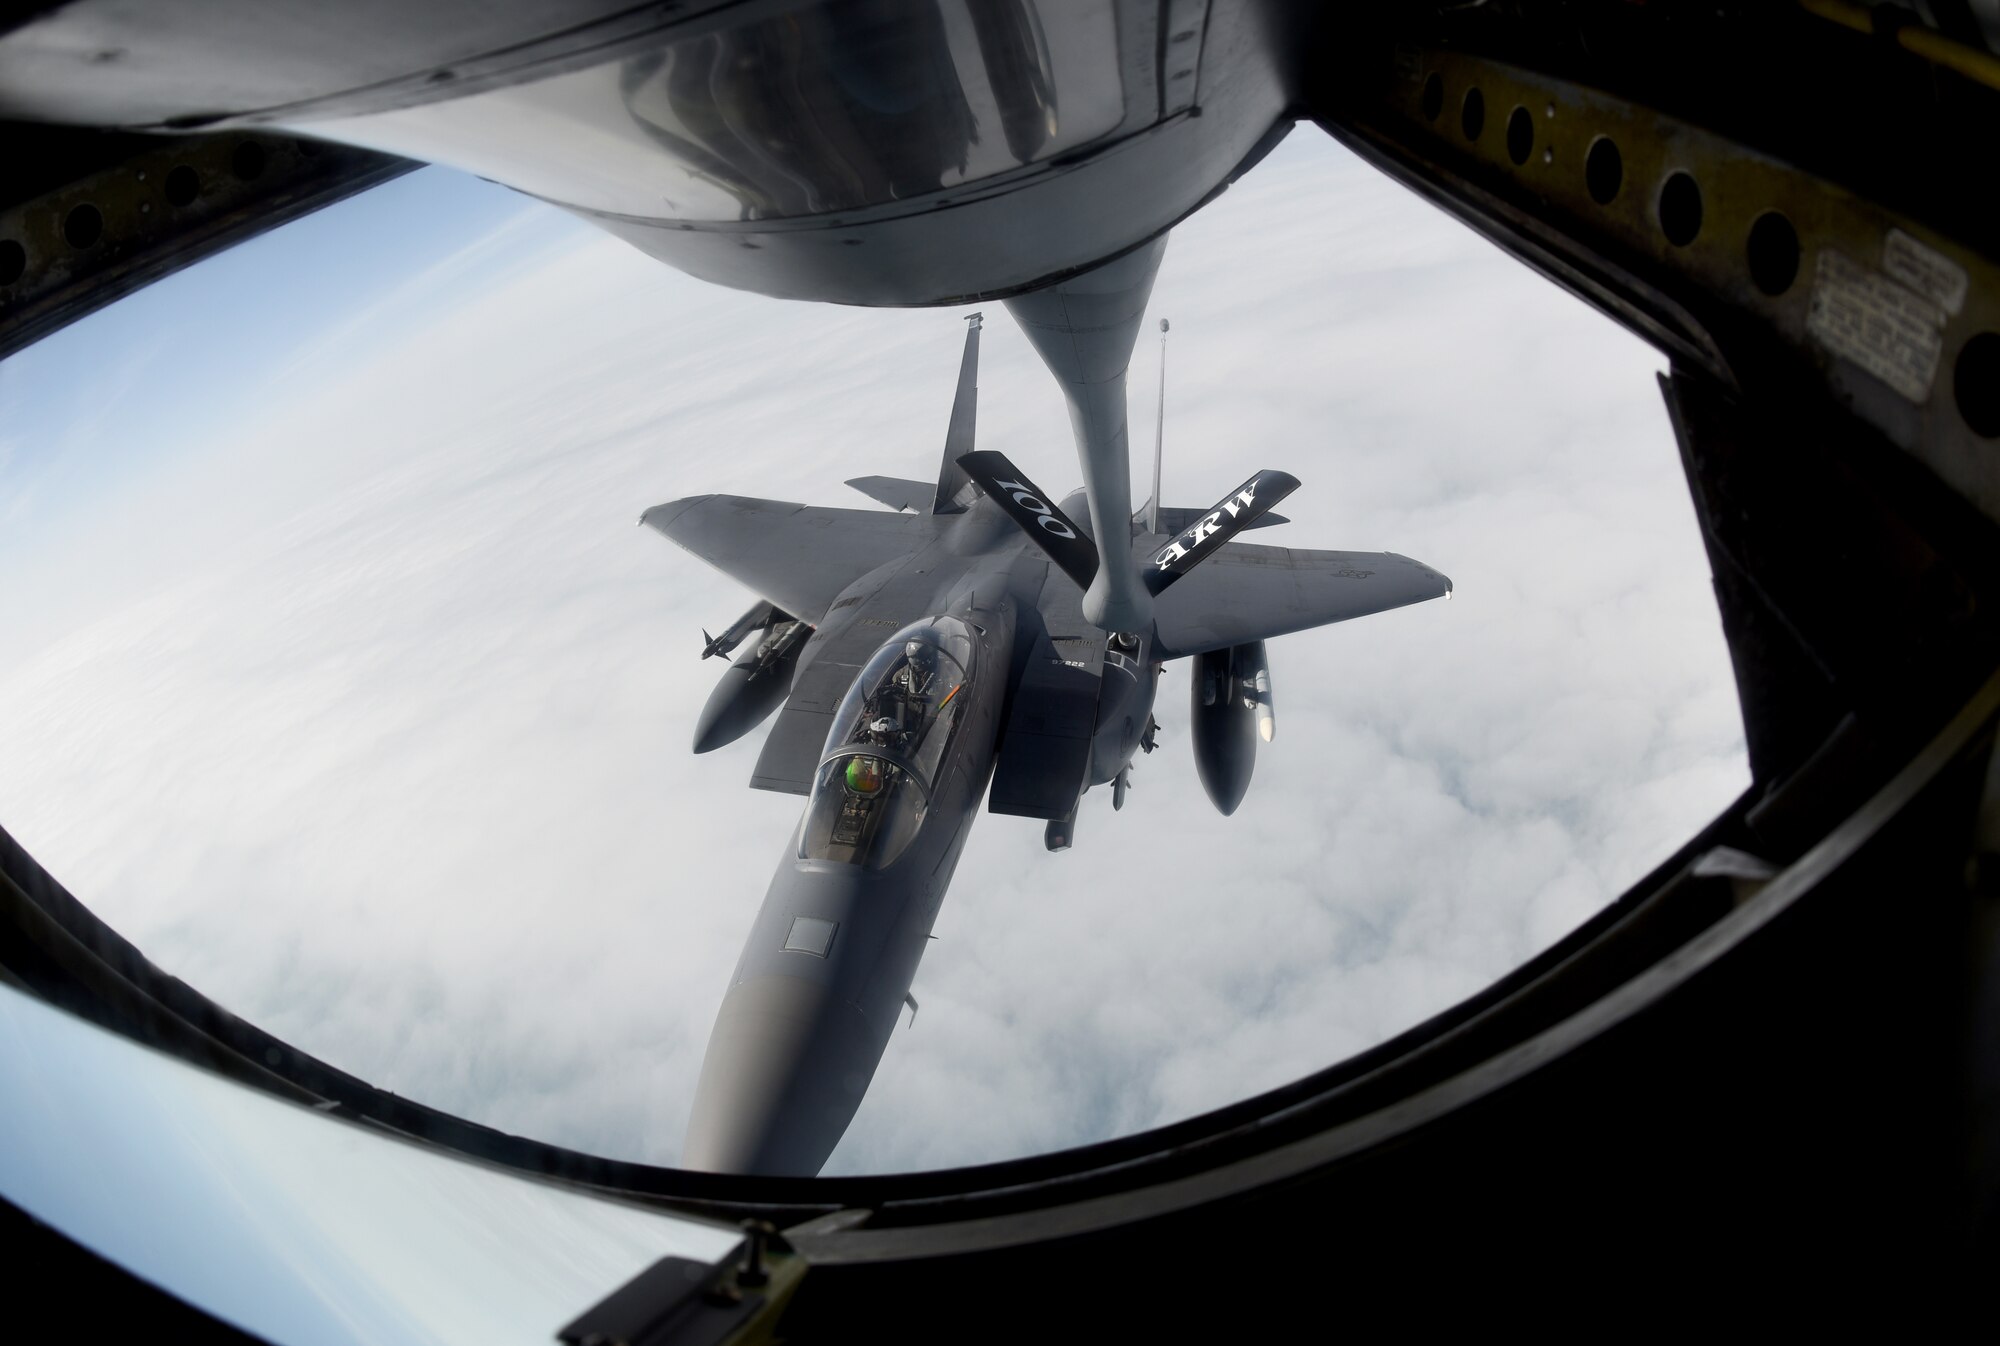 An F-15E Strike Eagle assigned to the 48th Fighter Wing at RAF Lakenheath, England, receives fuel from a 351st Air Refueling Squadron KC-135 Stratotanker at RAF Mildenhall during the “FURIOUS 48” readiness exercise over the skies of England, April 24, 2019. Exercise scenarios were designed to ensure 100th ARW Airmen were fully prepared for potential contingencies in the wing’s area of responsibility. (U.S. Air Force photo by Airman 1st Class Brandon Esau)